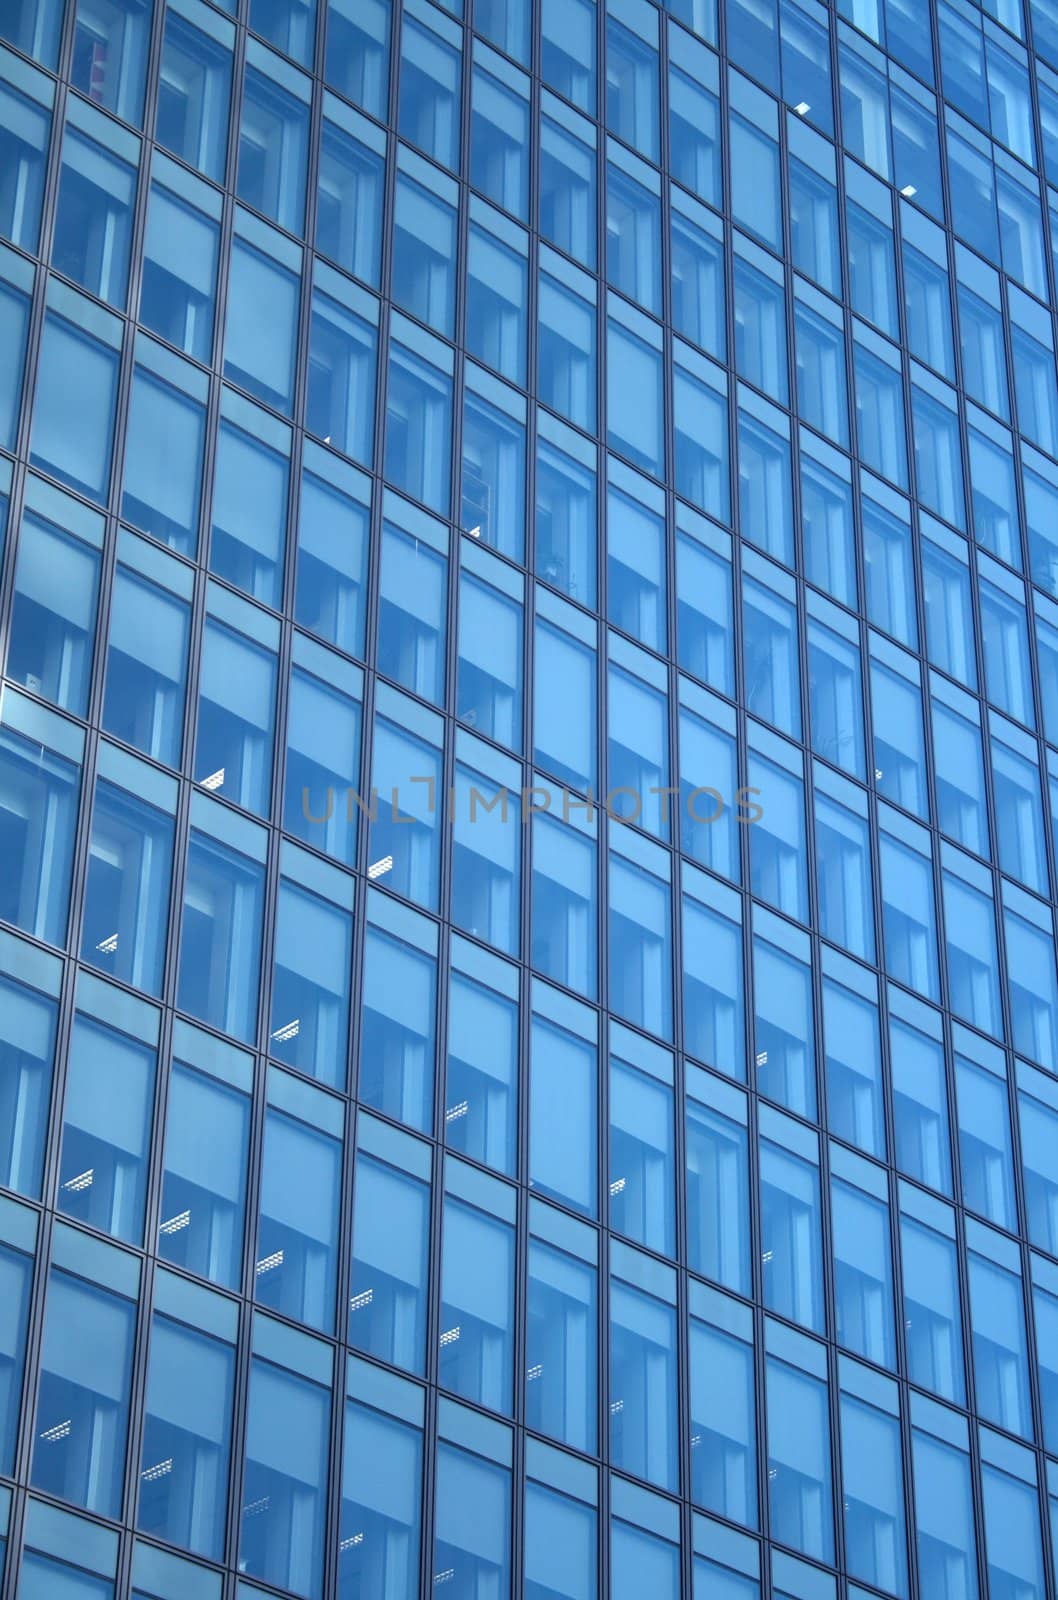 Lights in the windows of a skyscraper - working day.